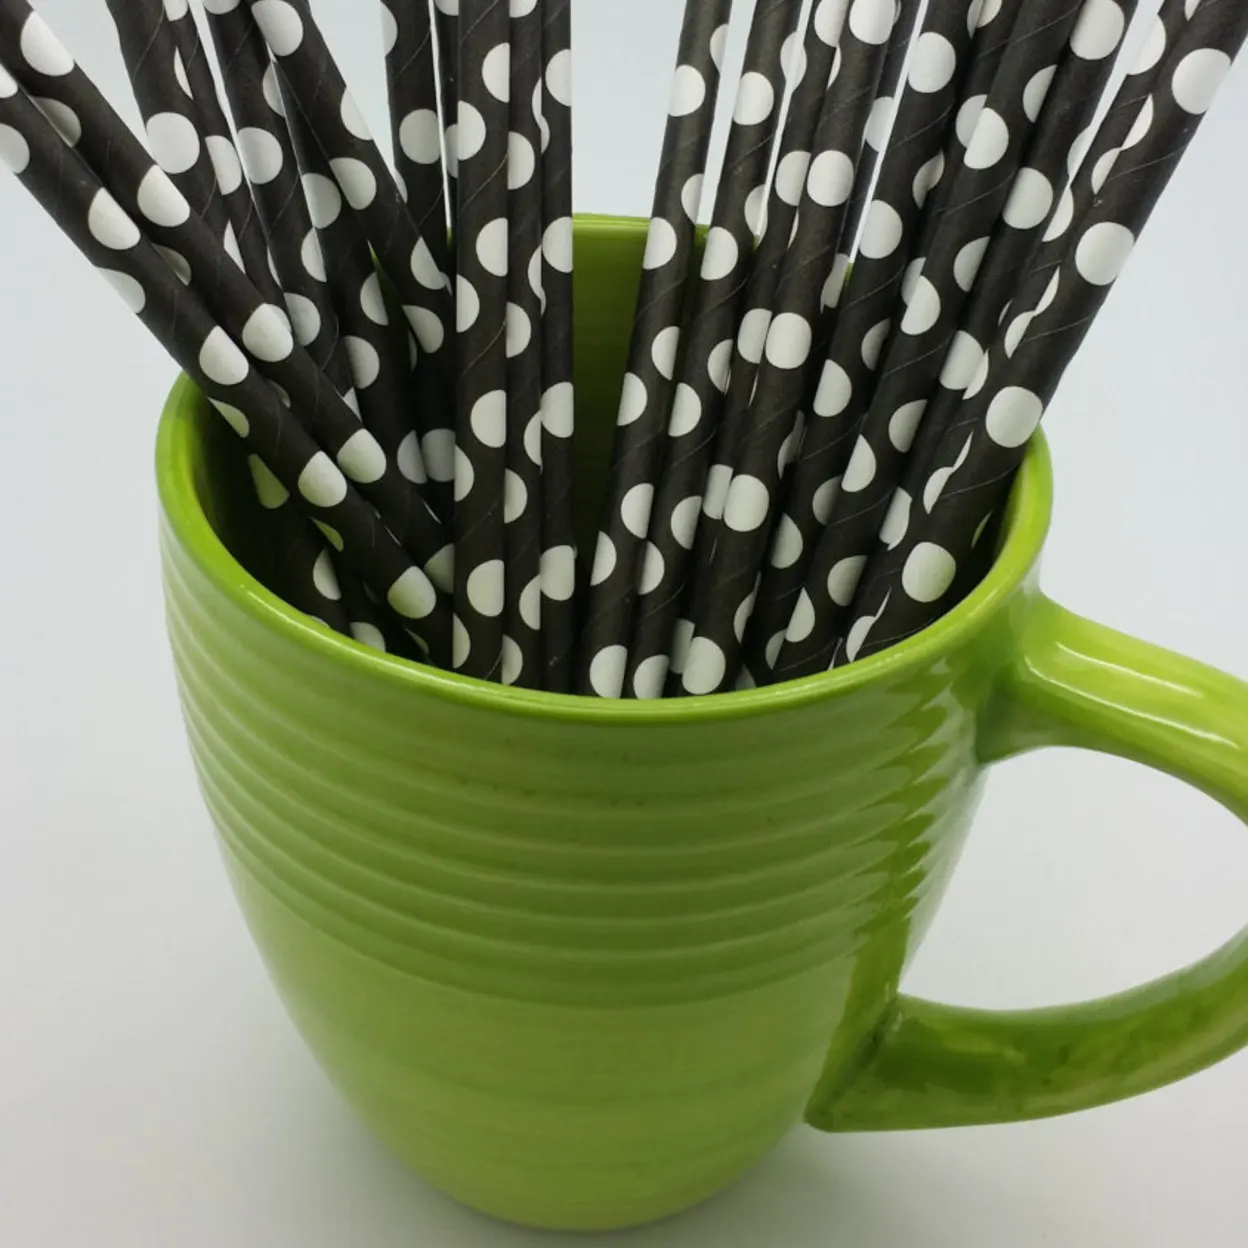 Buy Set of 50 black with white dots Paper Straws ships from Dallas Texas on